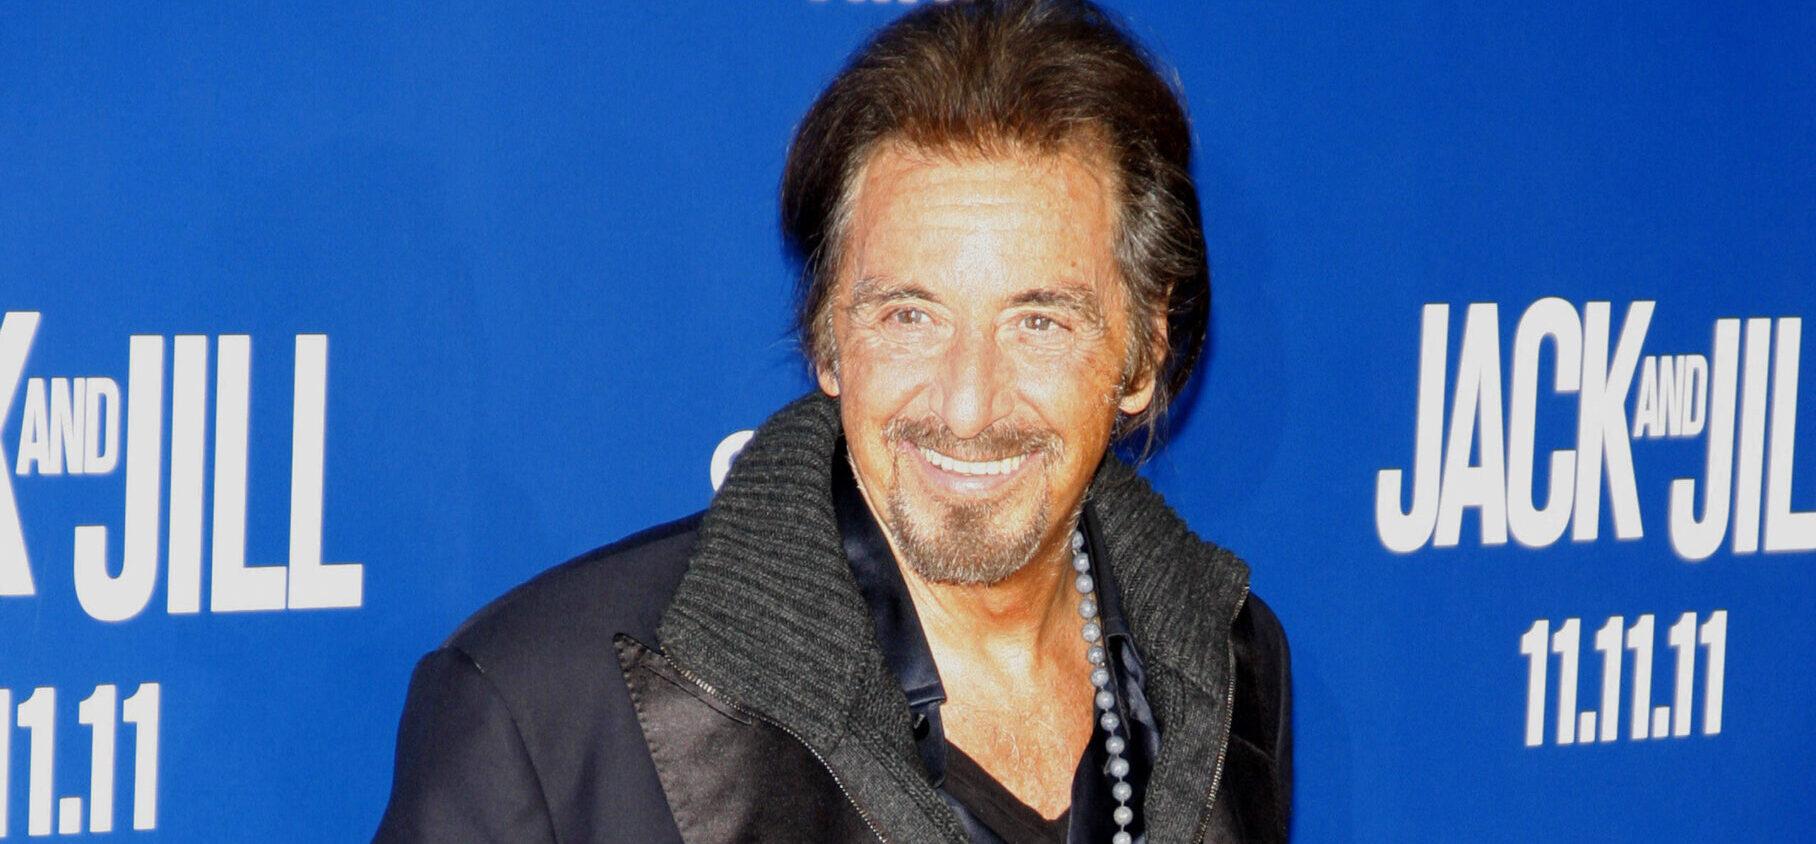 Al Pacino’s Ex-Girlfriend Files For Physical Custody Of Their Son